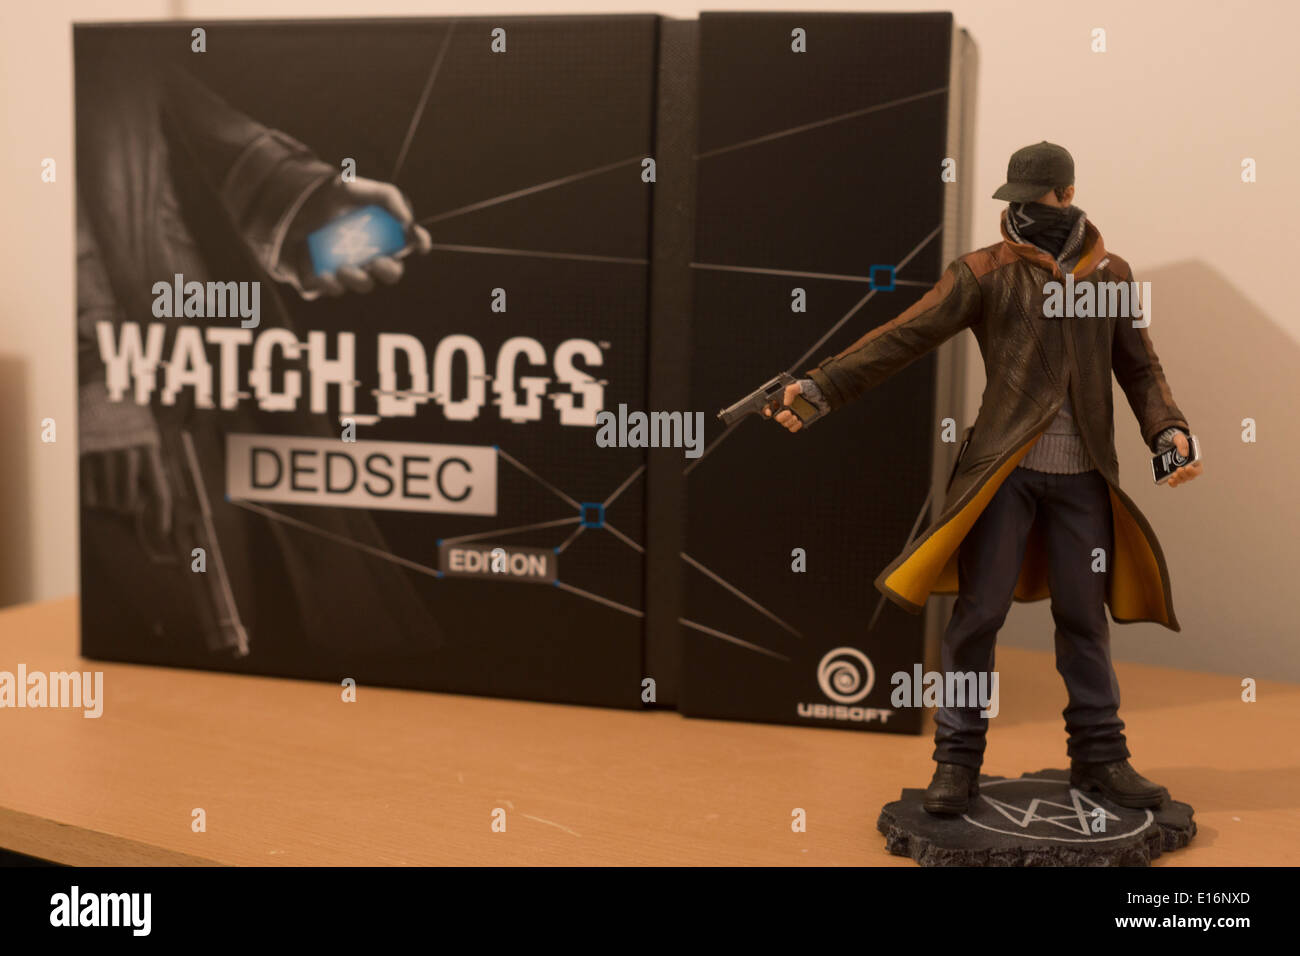 Watch   Dogs video game figurine  boxes cases Stock Photo